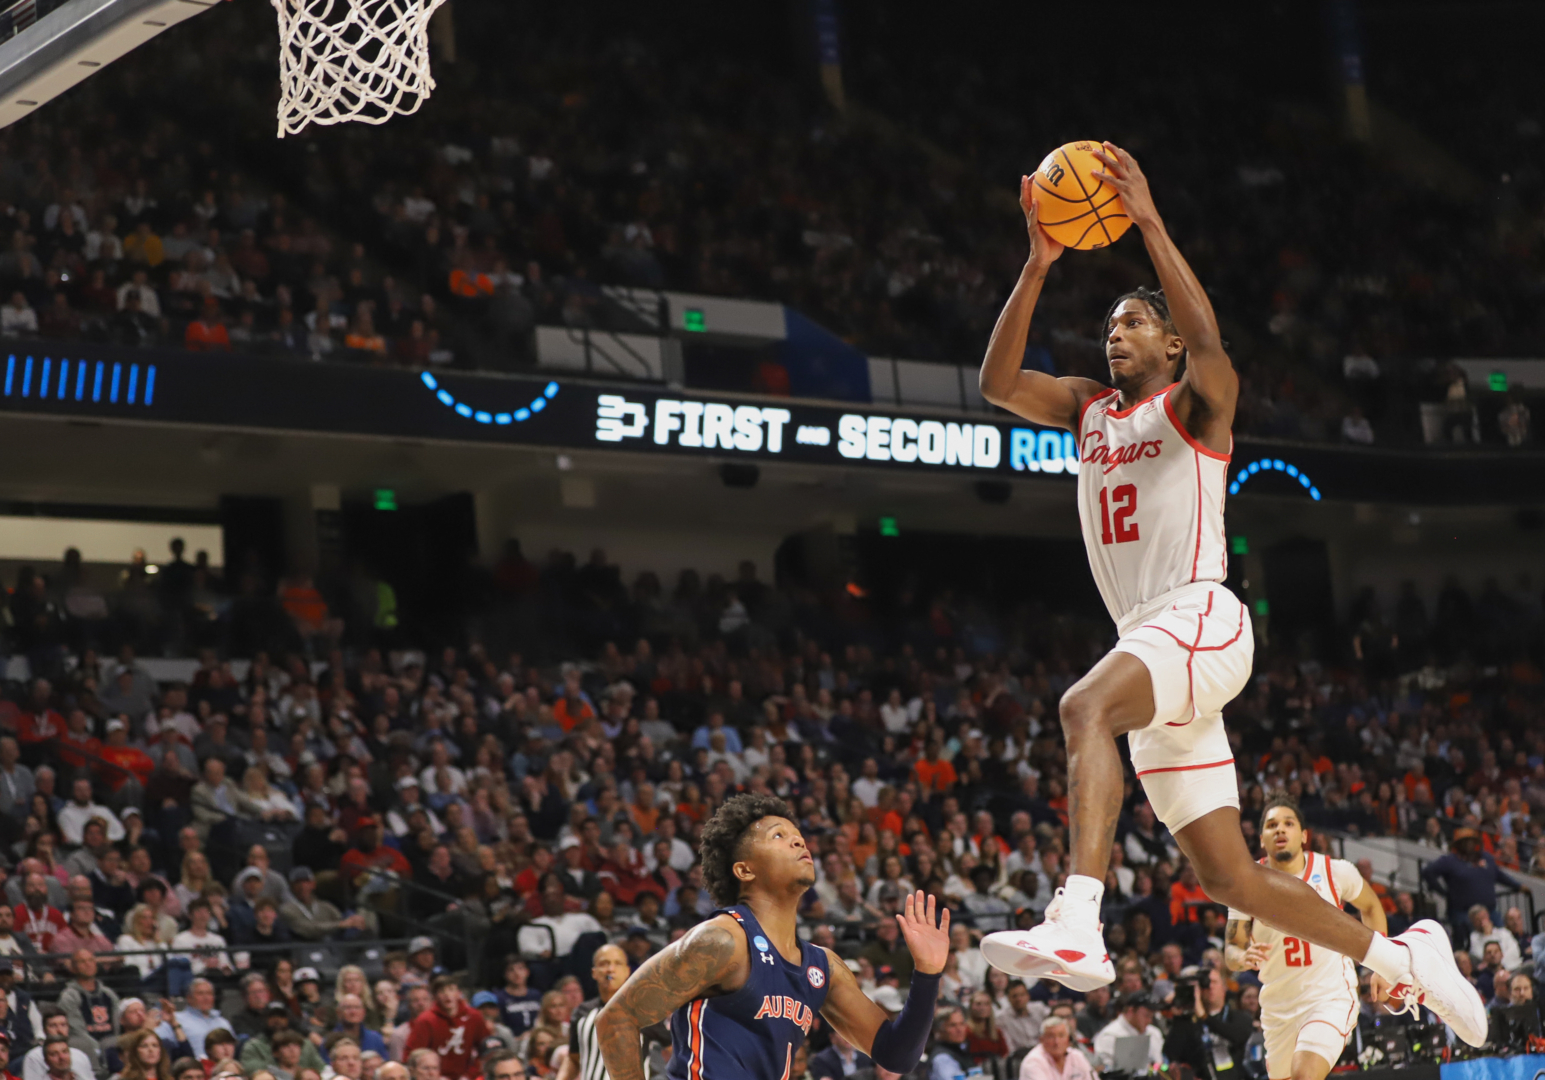 Tramon Mark scored a career-high 26 points in UH's win over Auburn at Legacy Arena on Saturday night in the secondround of the NCAA Tournament. | Anh Le/The Cougar